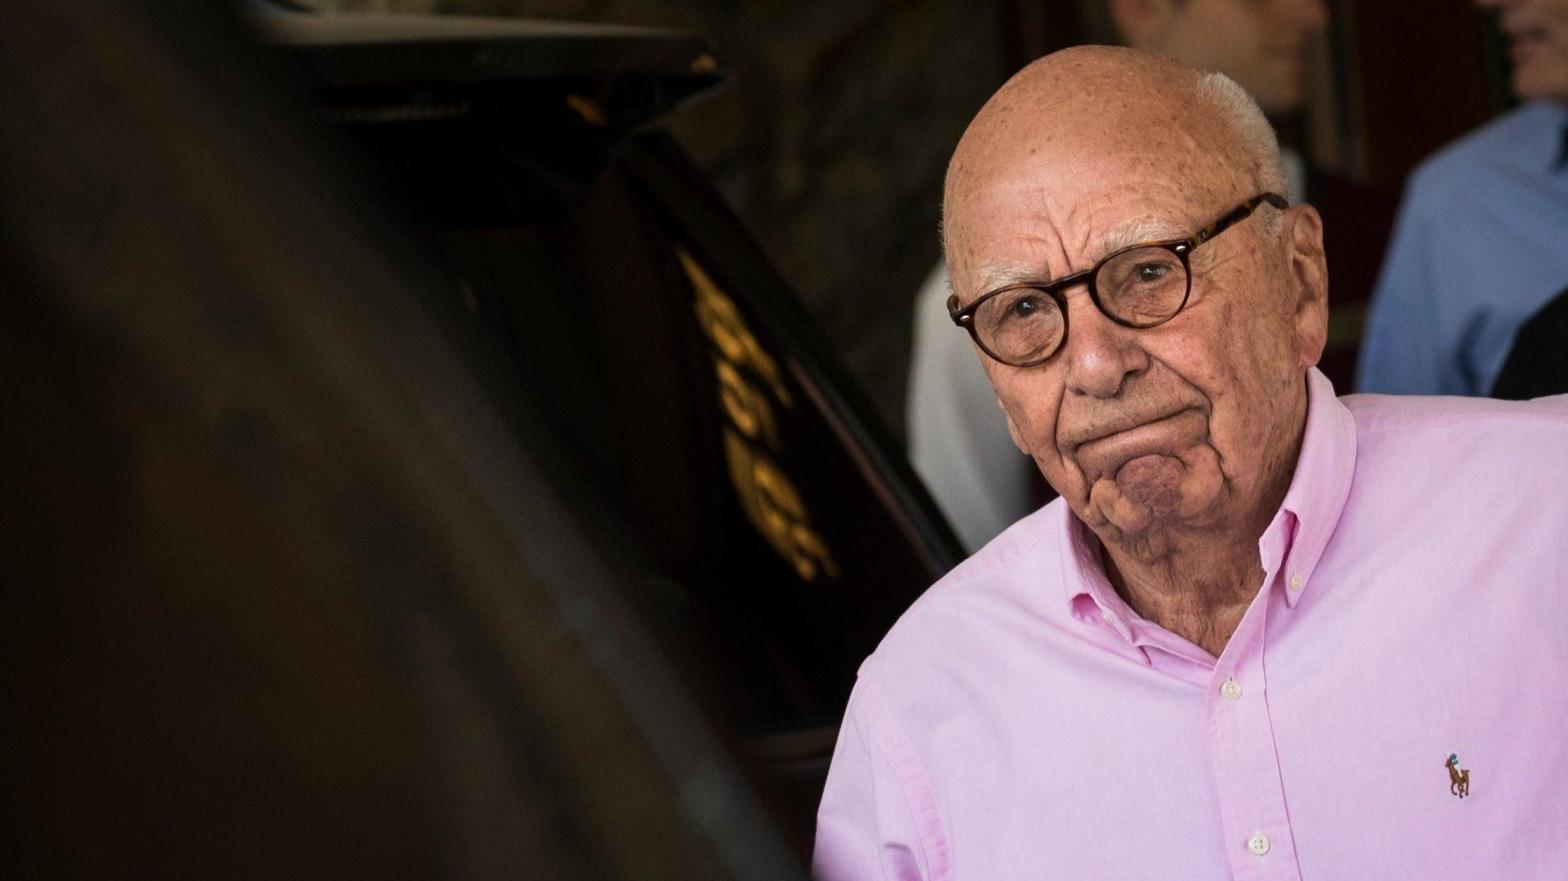 Australian-American Billionaire Rupert Murdoch is the head of the family that owns News Corp and its sister company Fox Corporation. He's now caught up in wild accusations he was directly involved in Fox News promoting the bogus 2020 election conspiracy. (Photo: Drew Angerer, Getty Images)